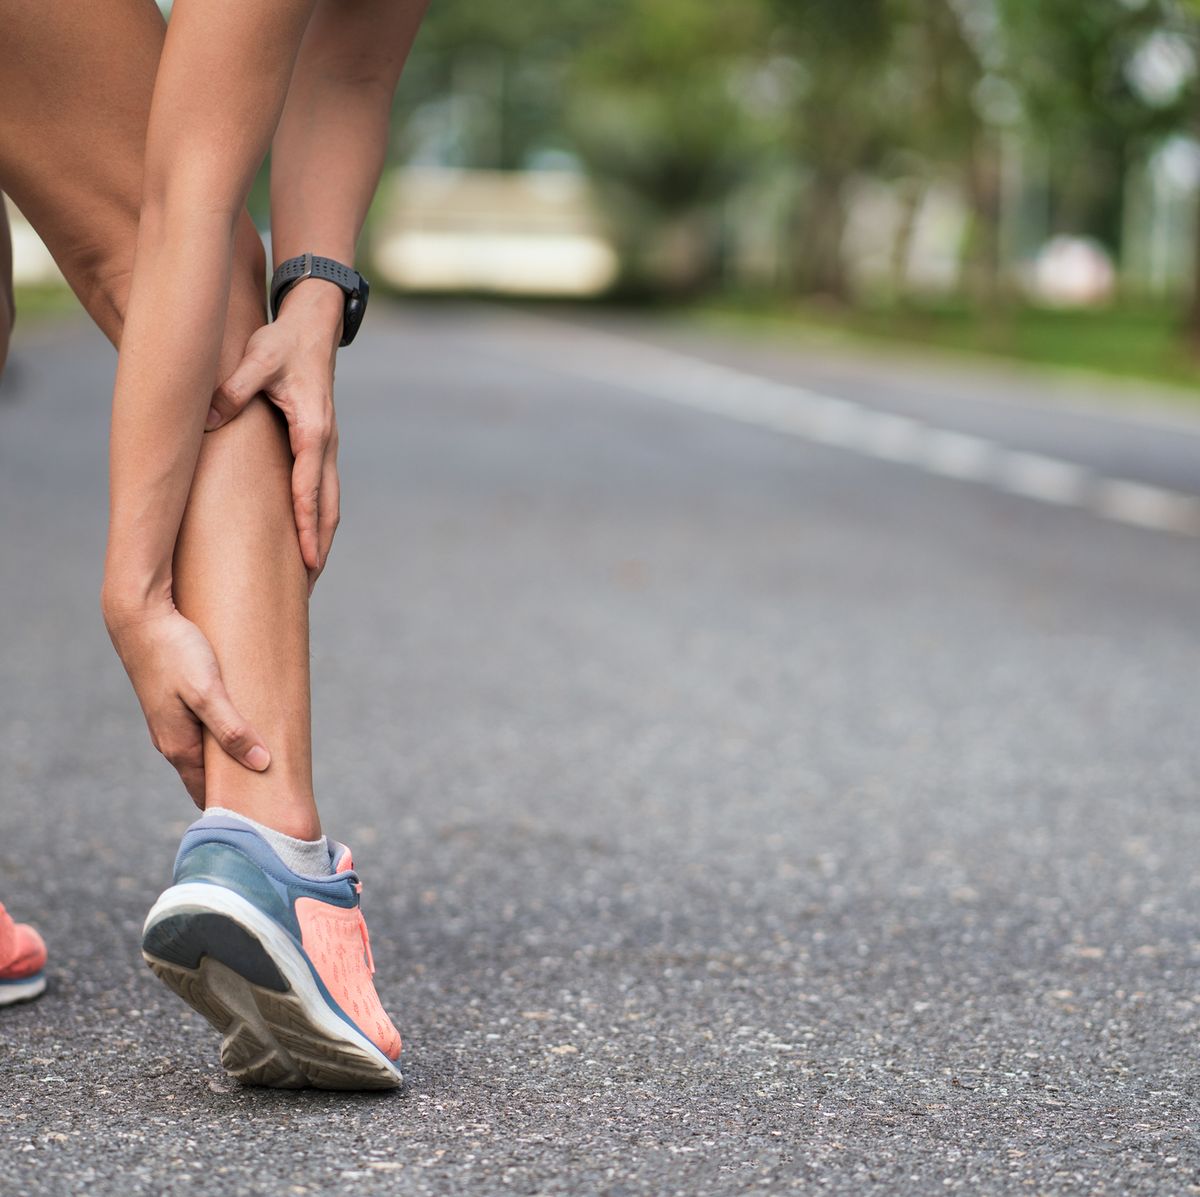 Achilles Pain While Running: What It Means and What to Do